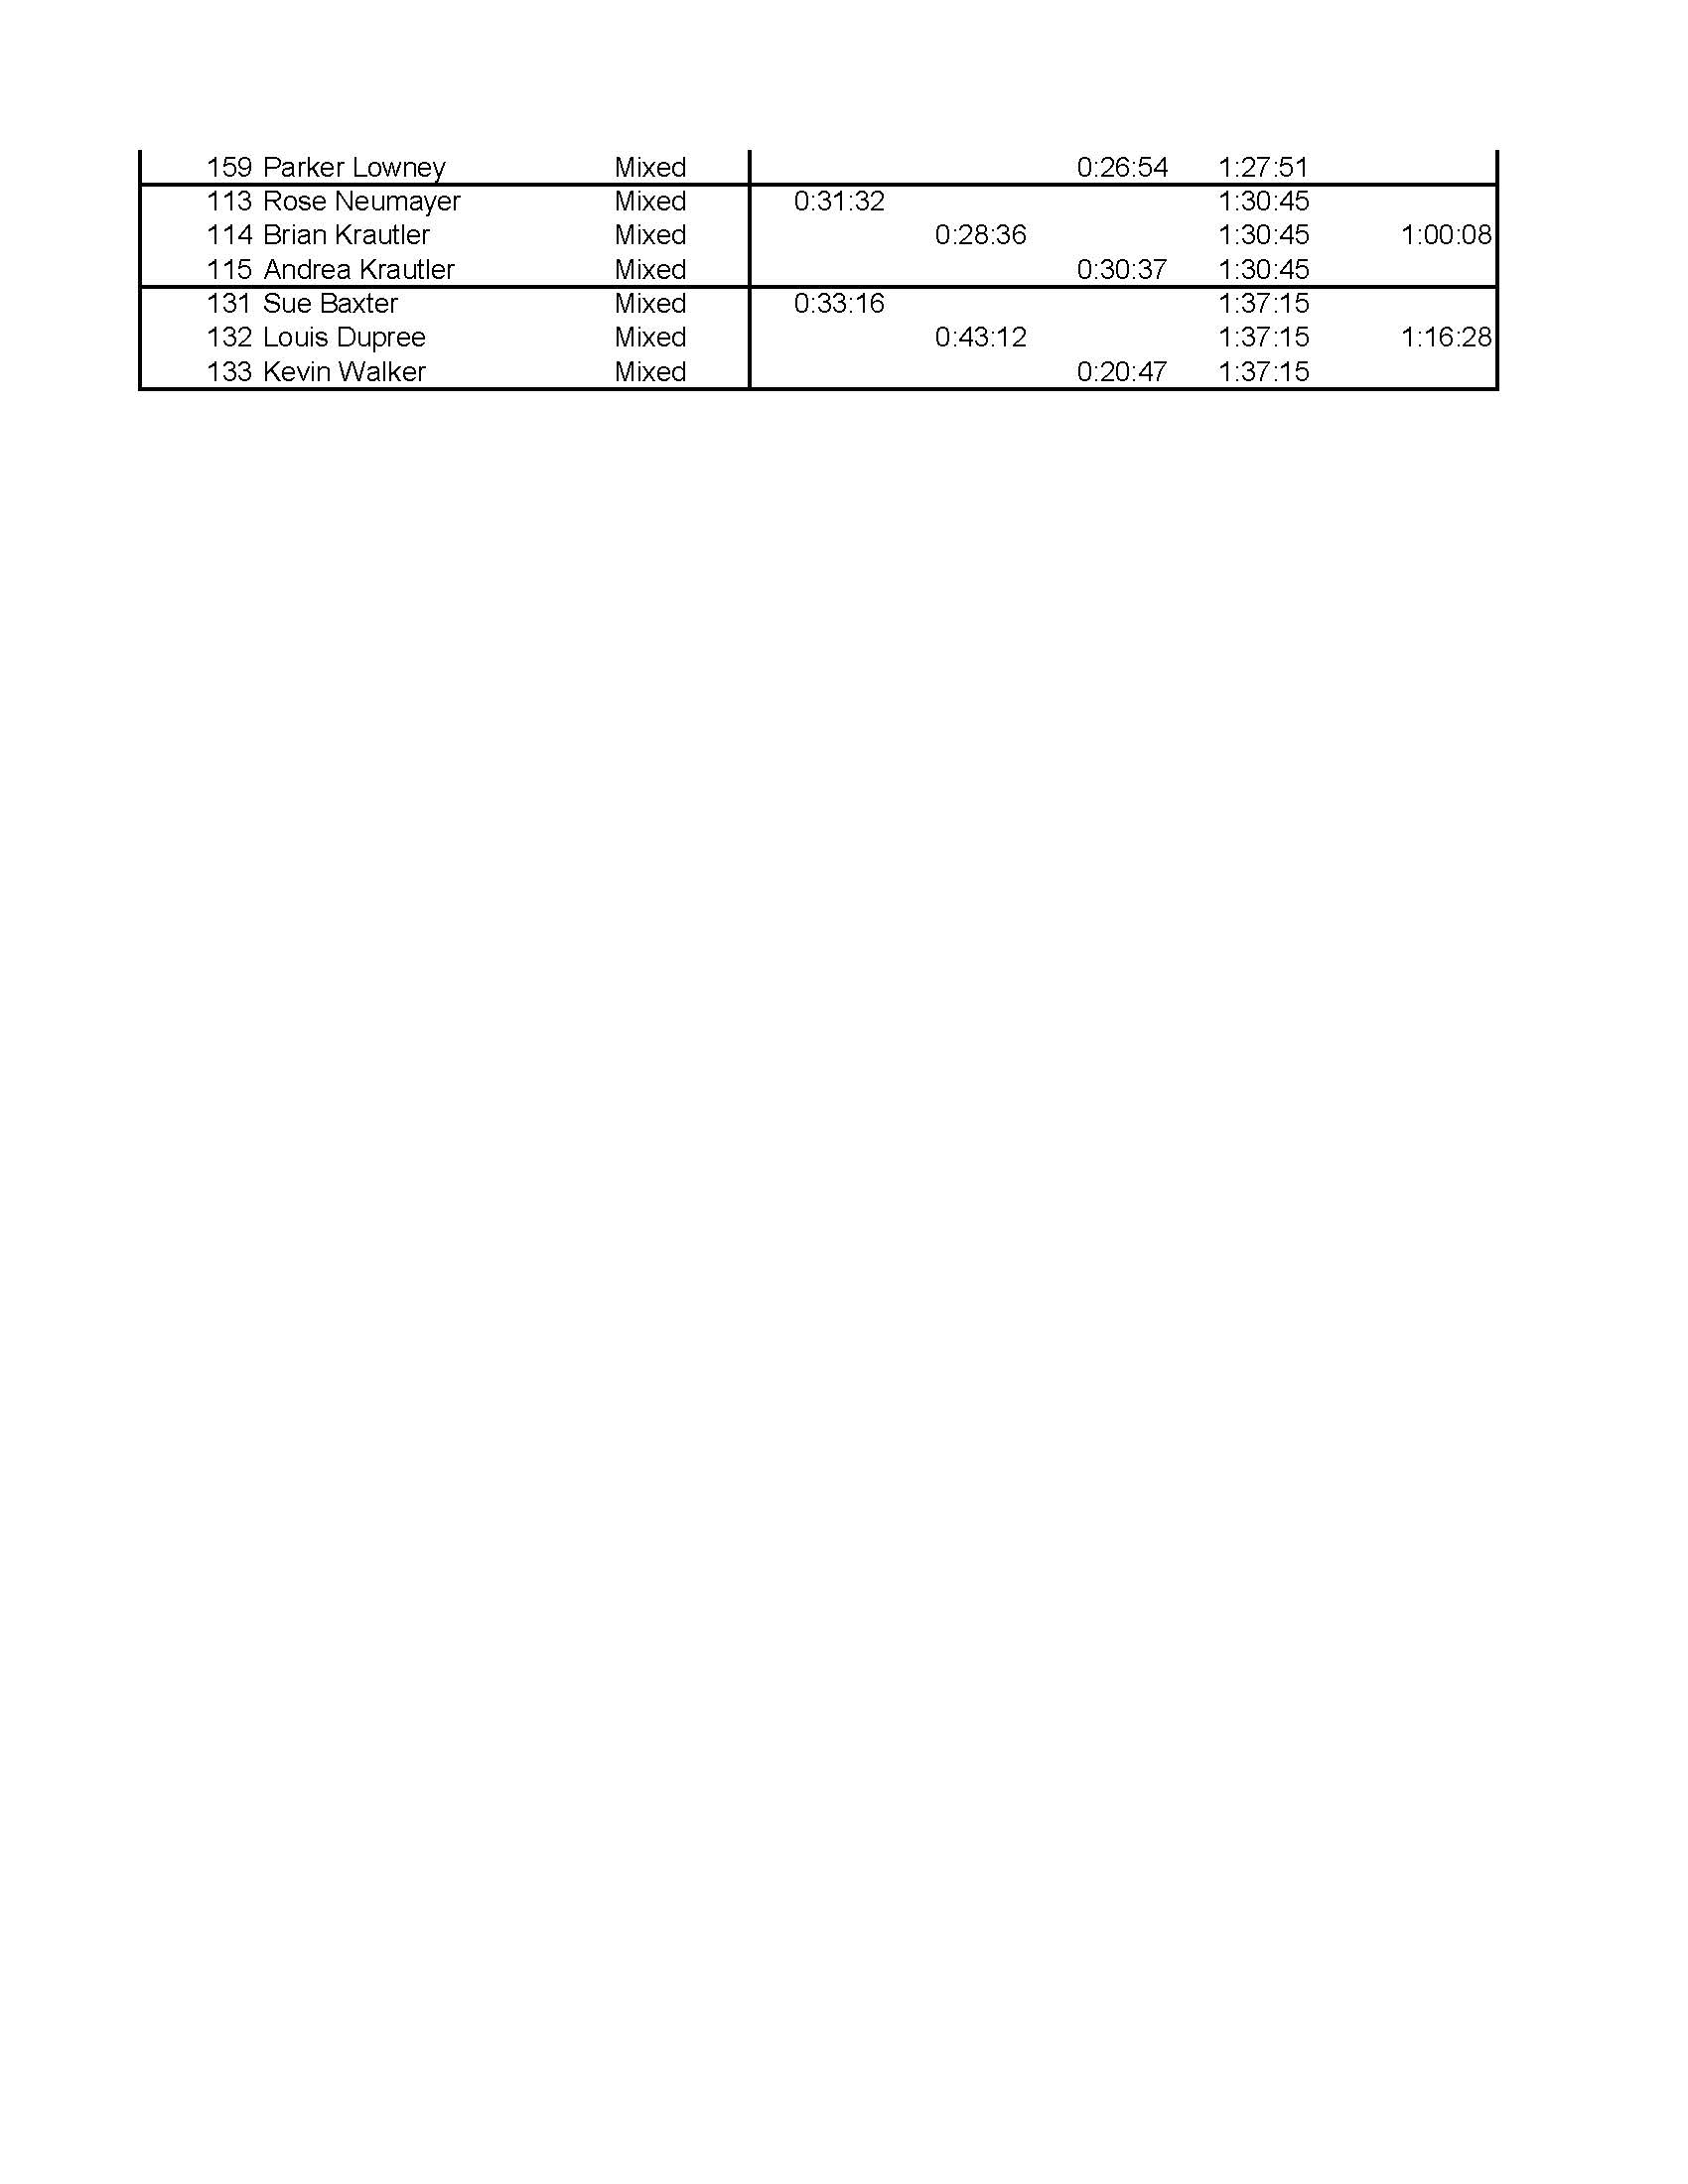 2014 Sea to Ski Team Results, page 2